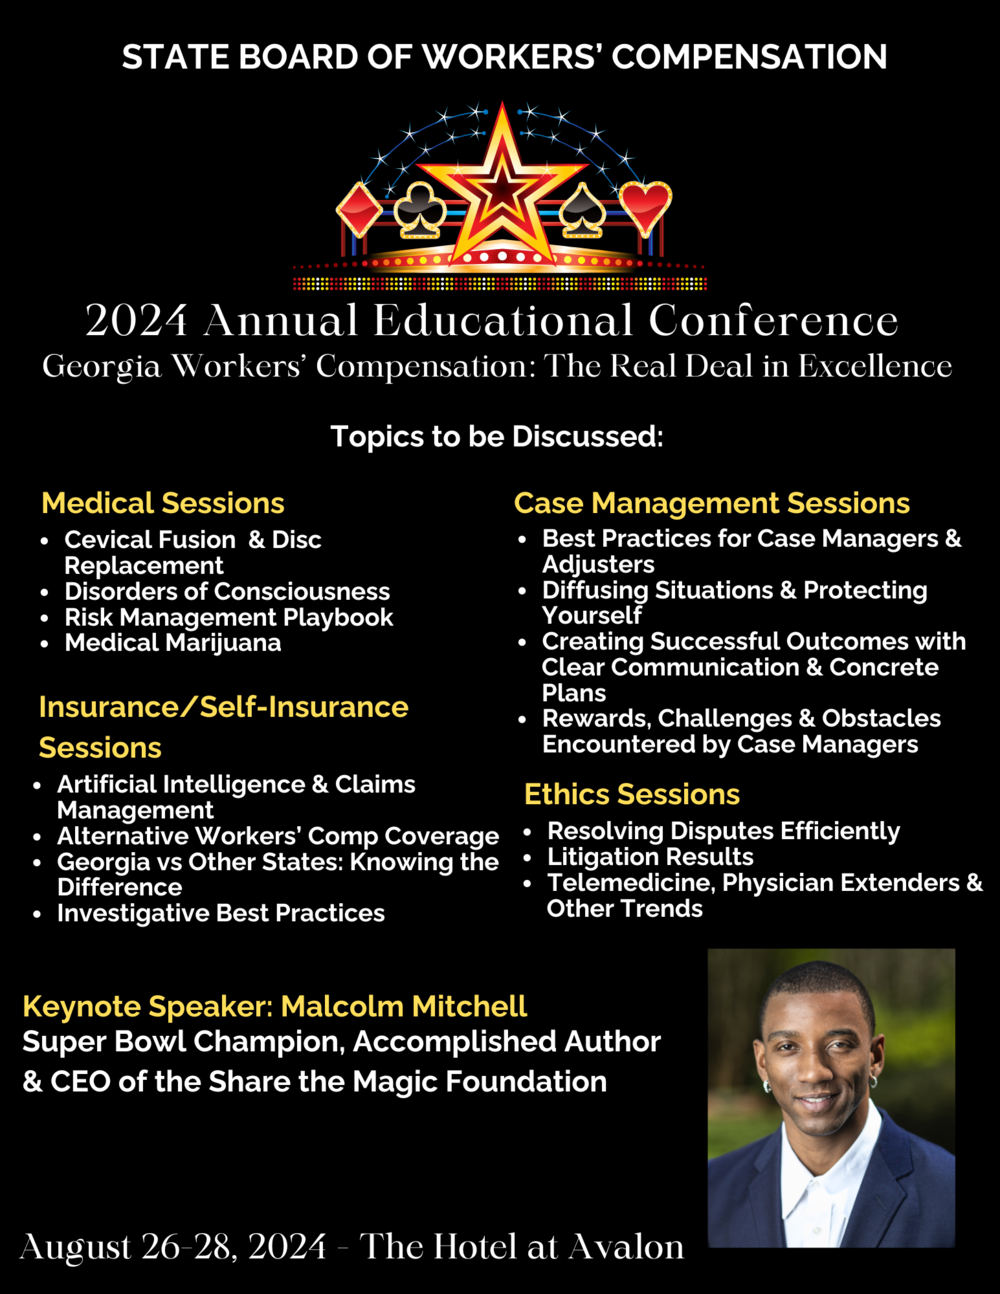 2024 Annual Educational Conference - The Real Deal in Excellence